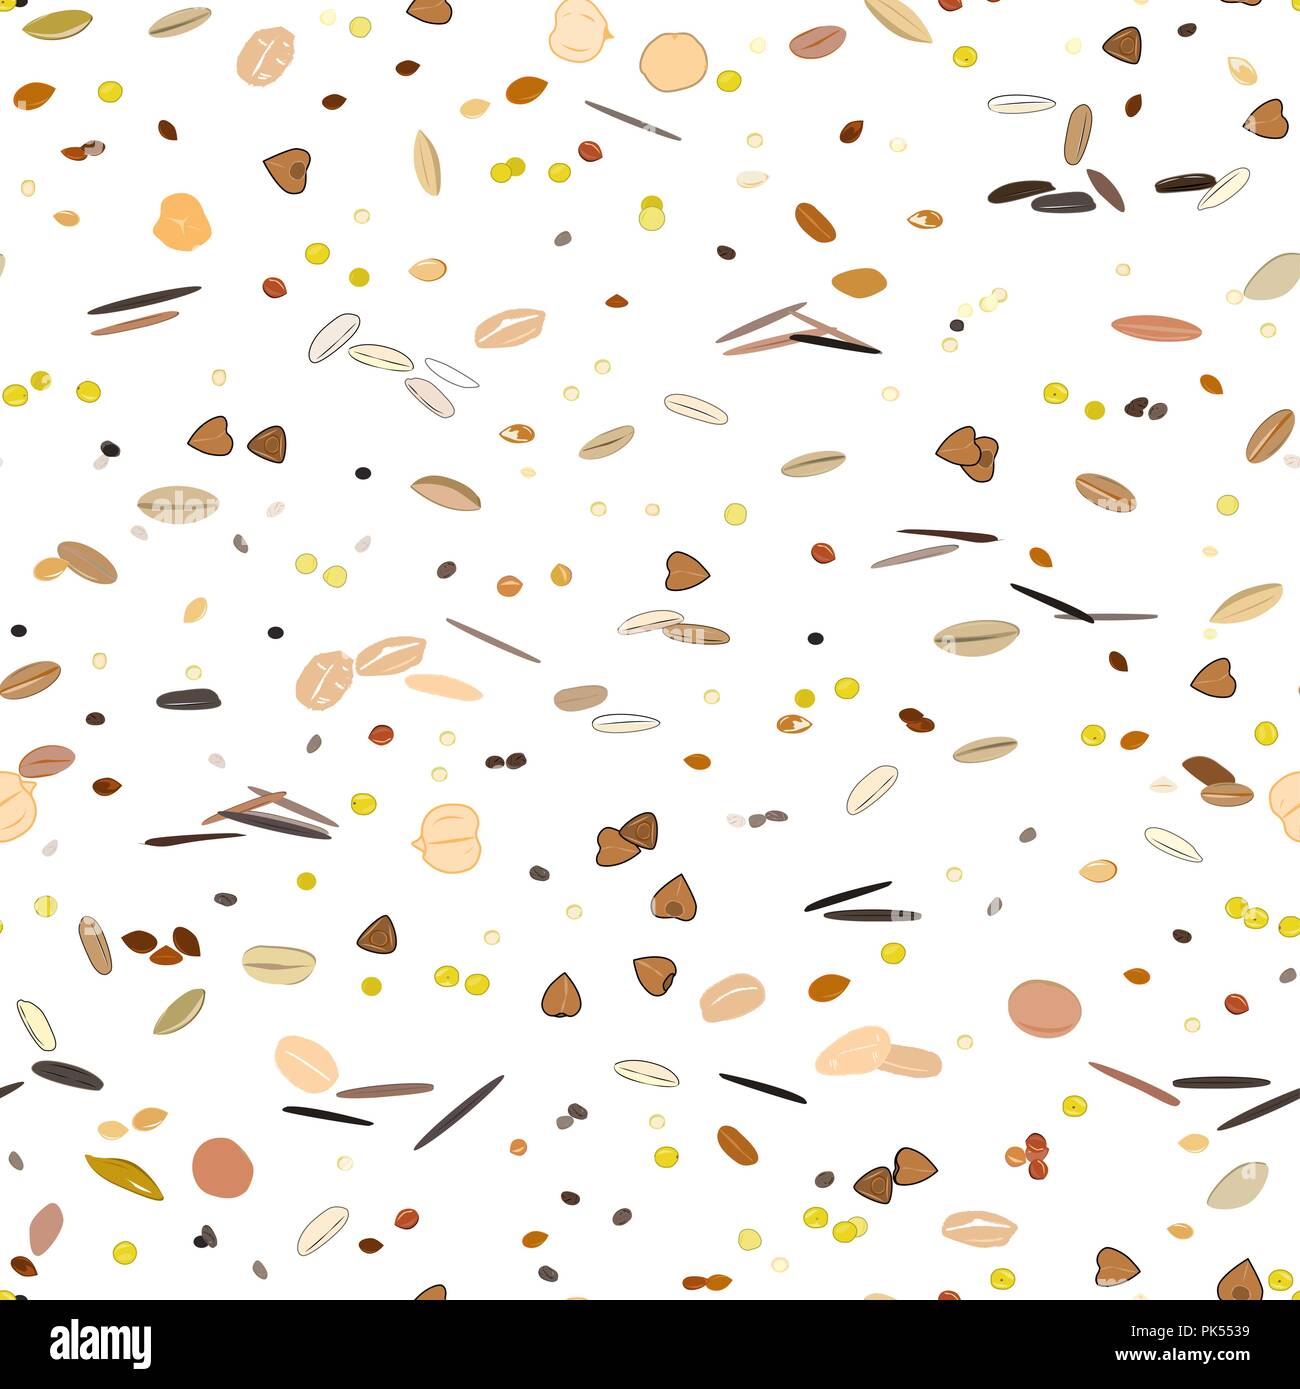 Seamless pattern with grains and cereals. Wheat, barley, oats, rye, buckwheat, amaranth, rice, millet sorghum quinoa chia seeds oatmeal legumes Vector Stock Vector